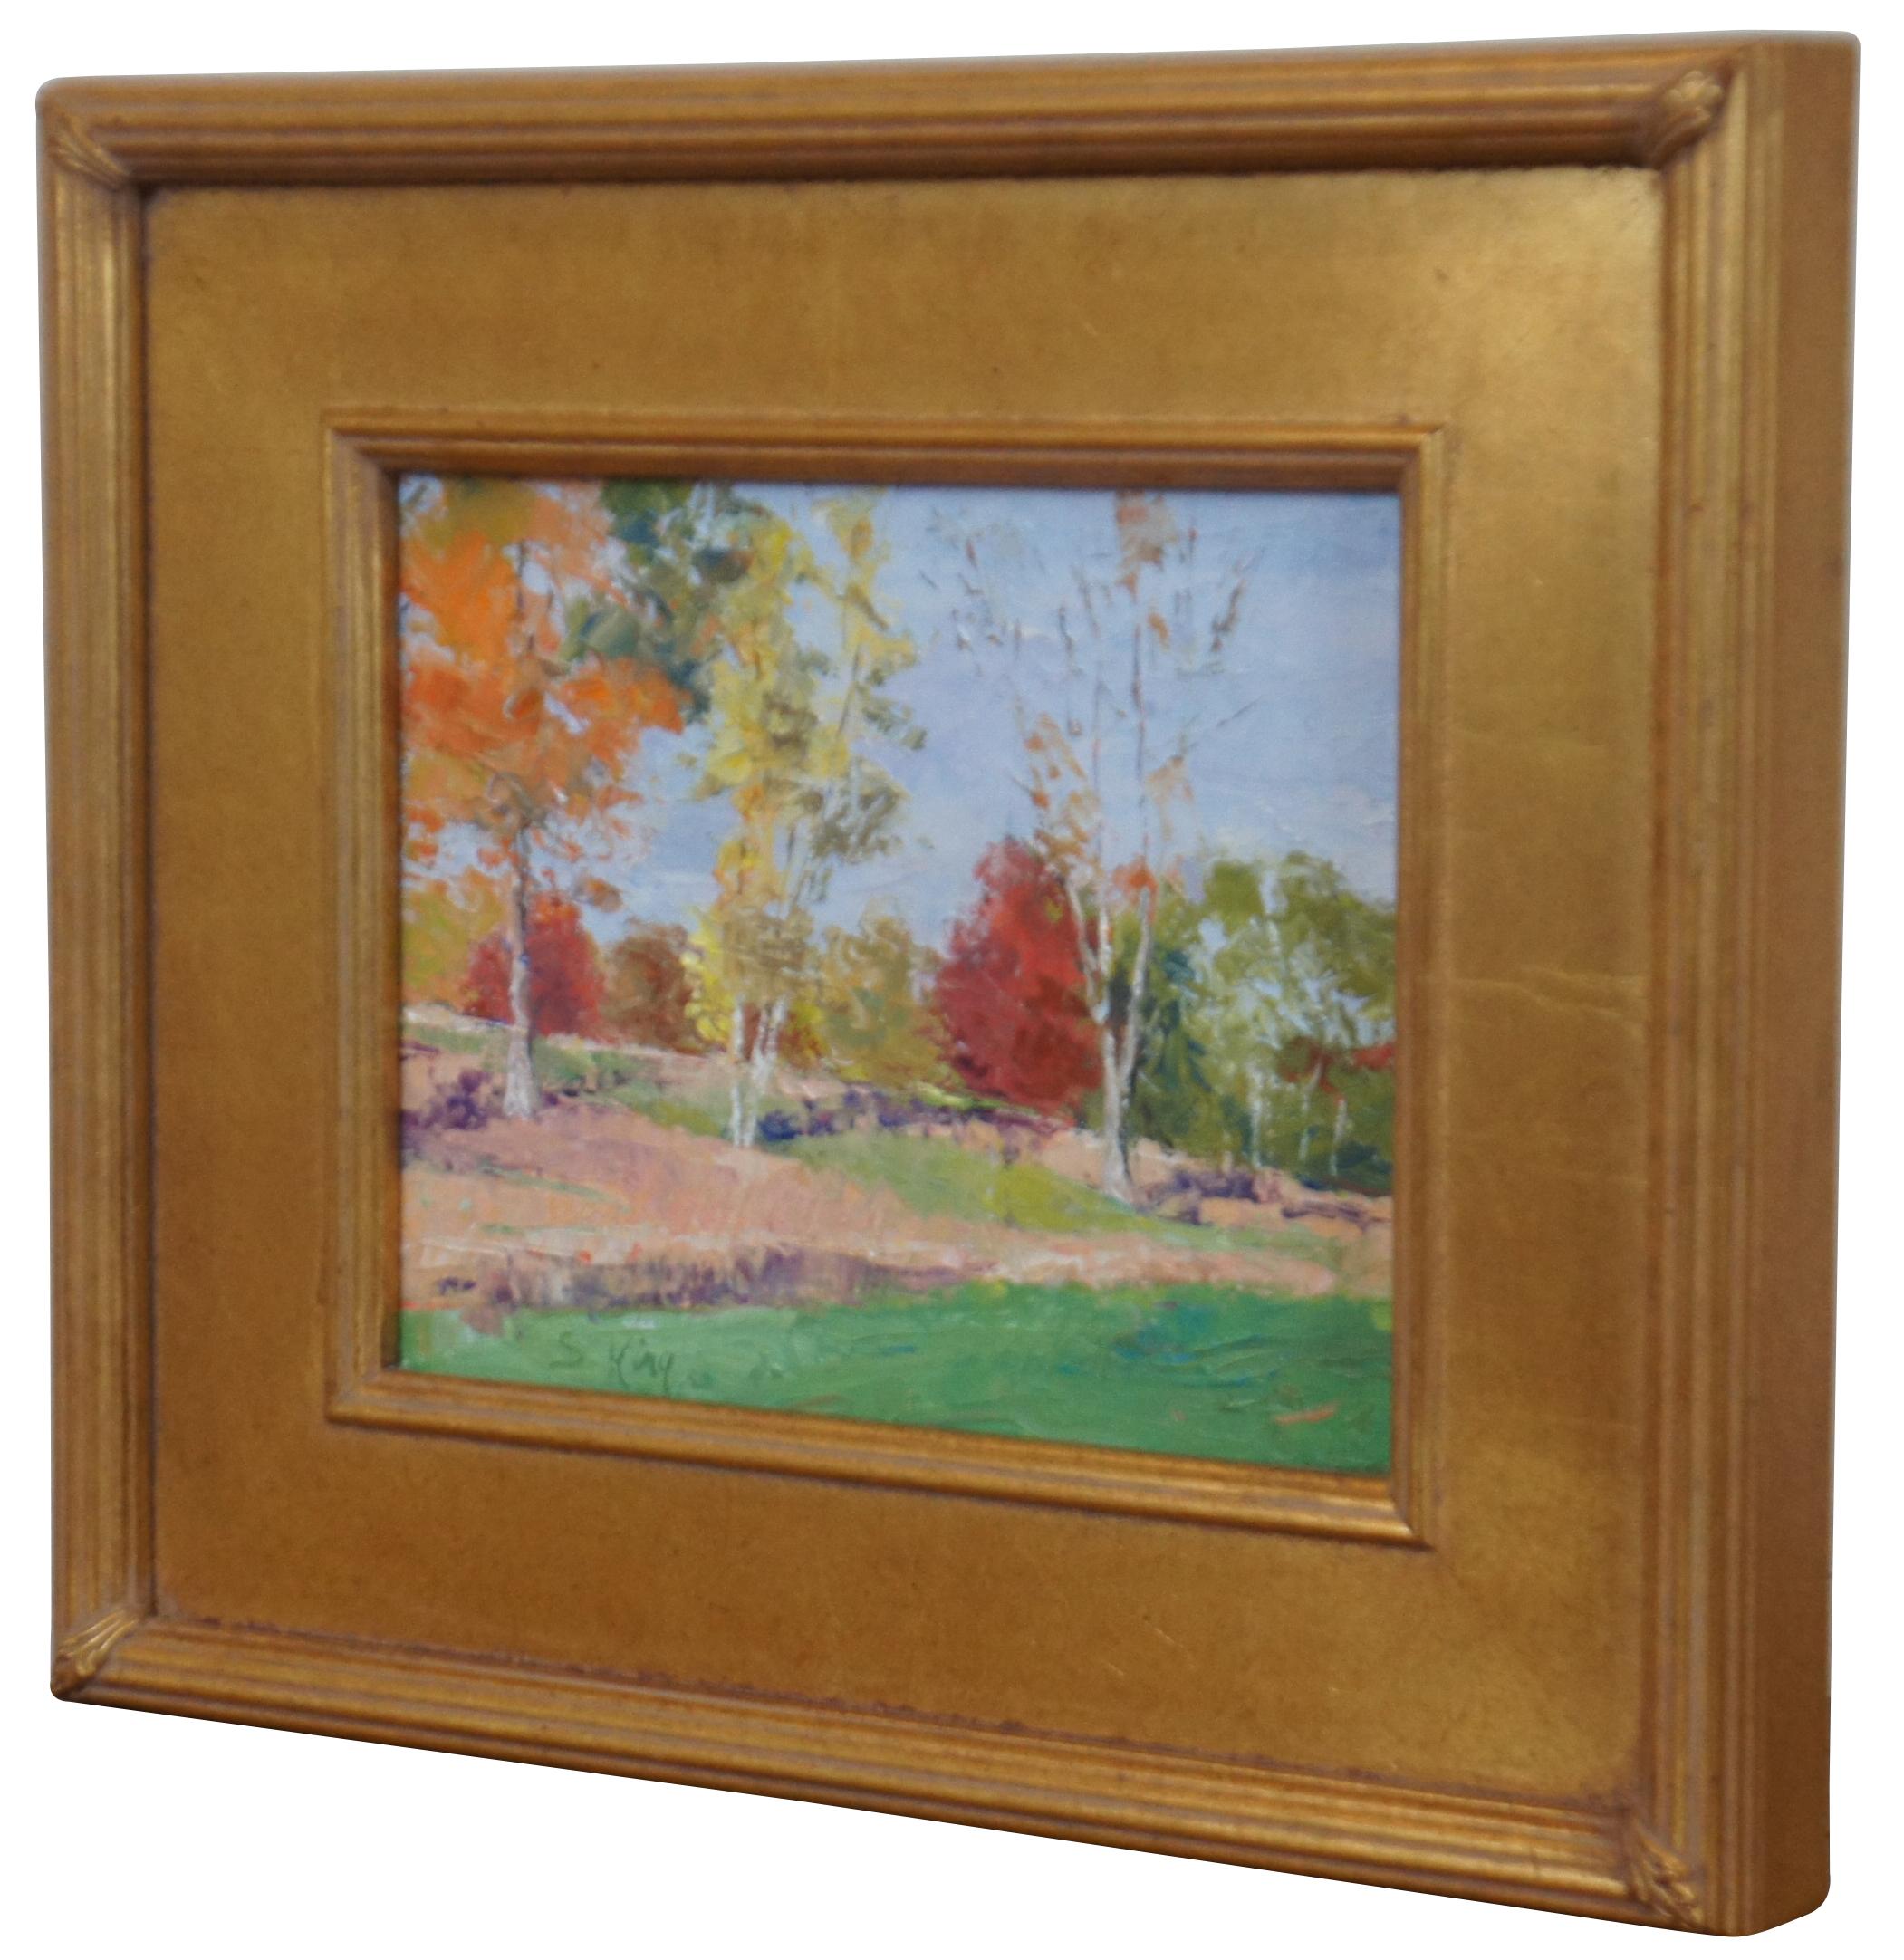 Oil on canvas impressionist painting by Dayton, Ohio artist Susie King featuring a Autumn or Fall landscape of trees. Framed in gold.

Measures: 15.75” x 1.75” x 13.75” / Sans Frame - 9.5” x 7.5” (Width x Depth x Height).